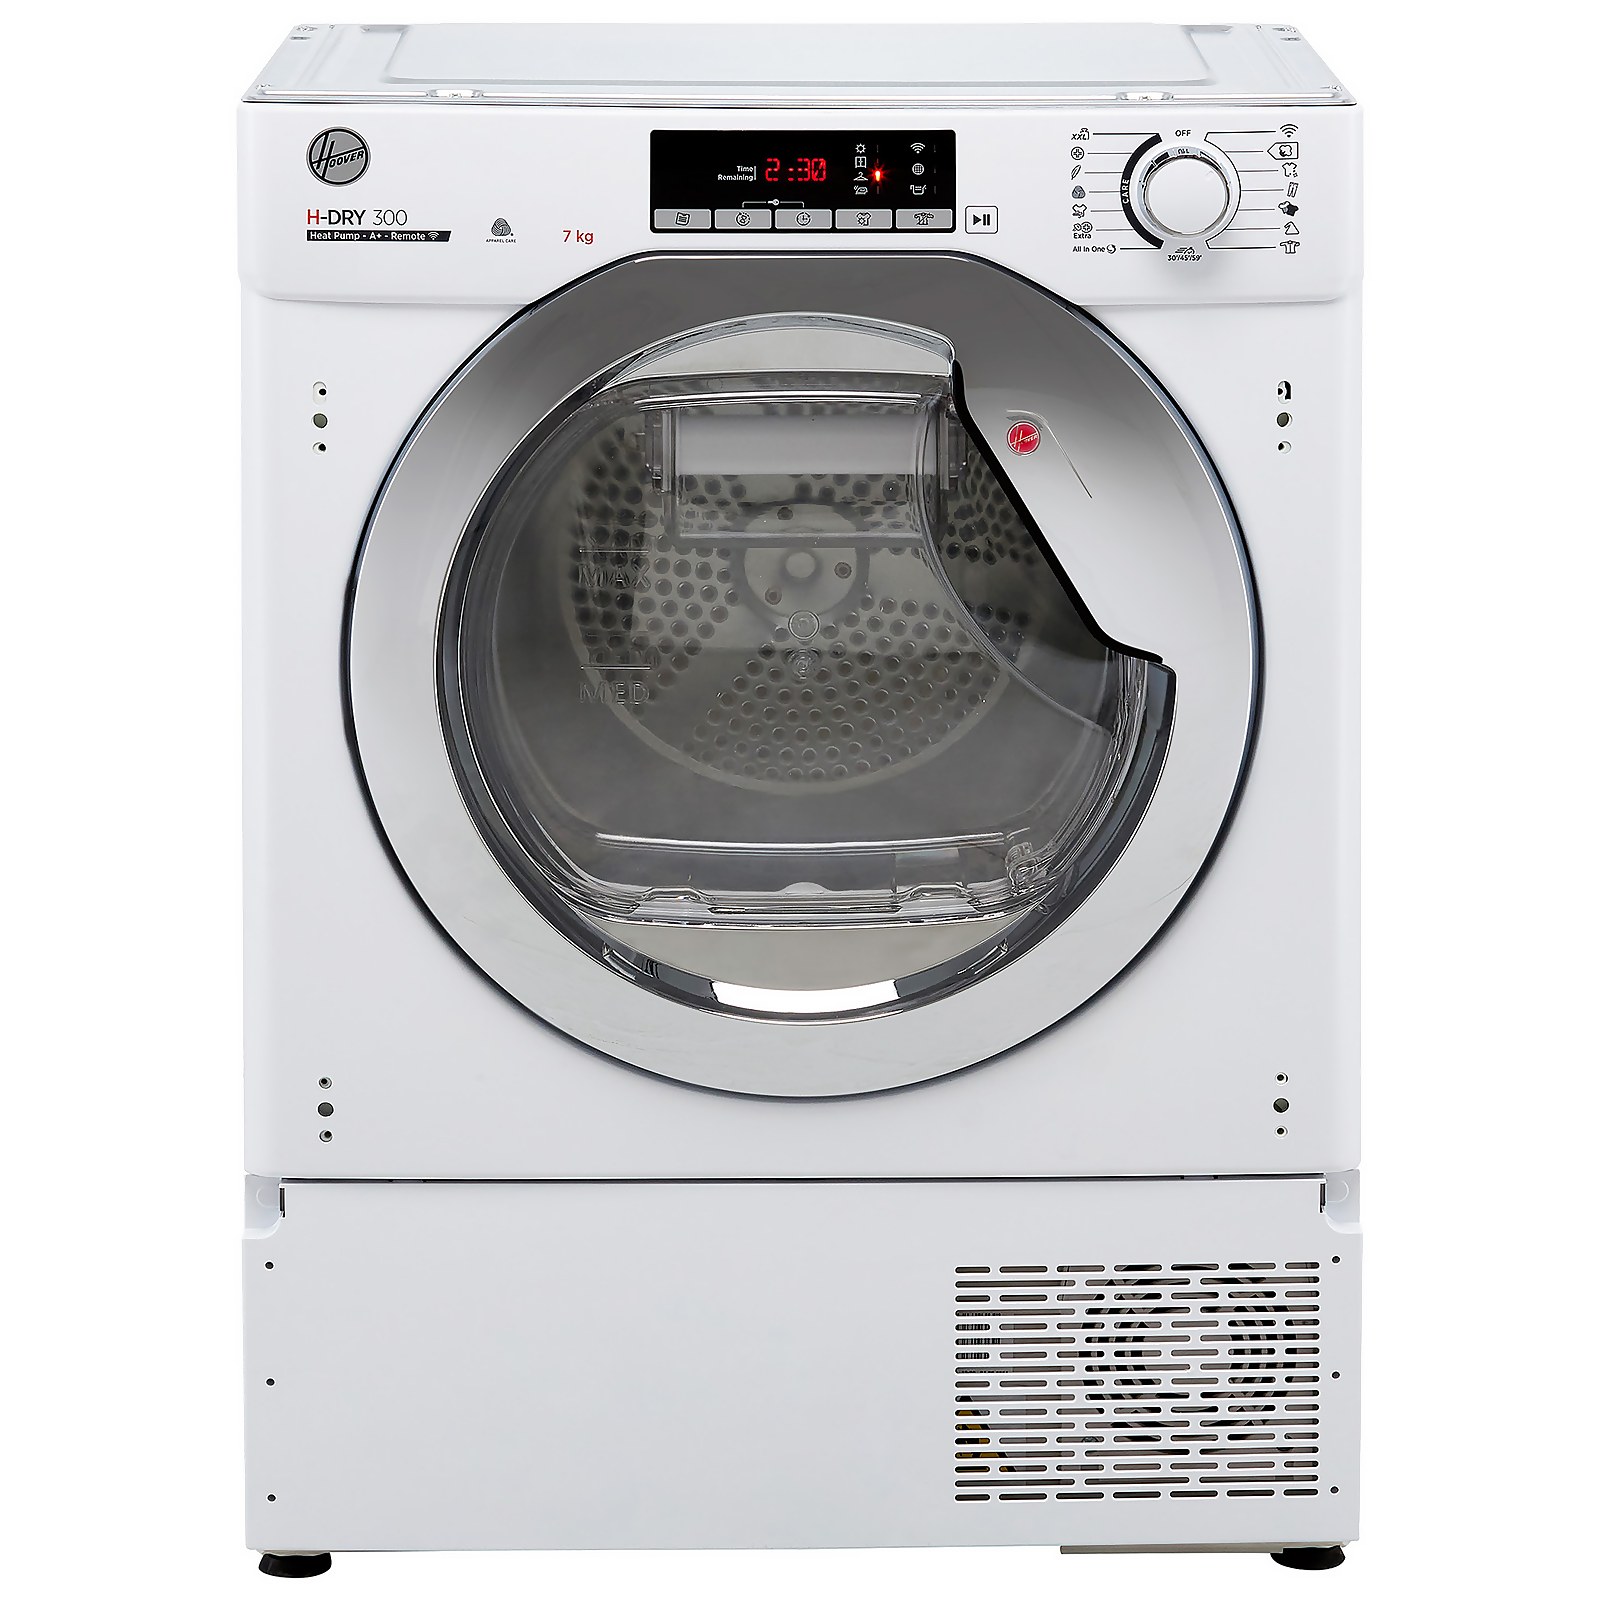 Hoover H-DRY 300 BATDH7A1TCE Integrated Wi-Fi Connected 7Kg Heat Pump Tumble Dryer - White